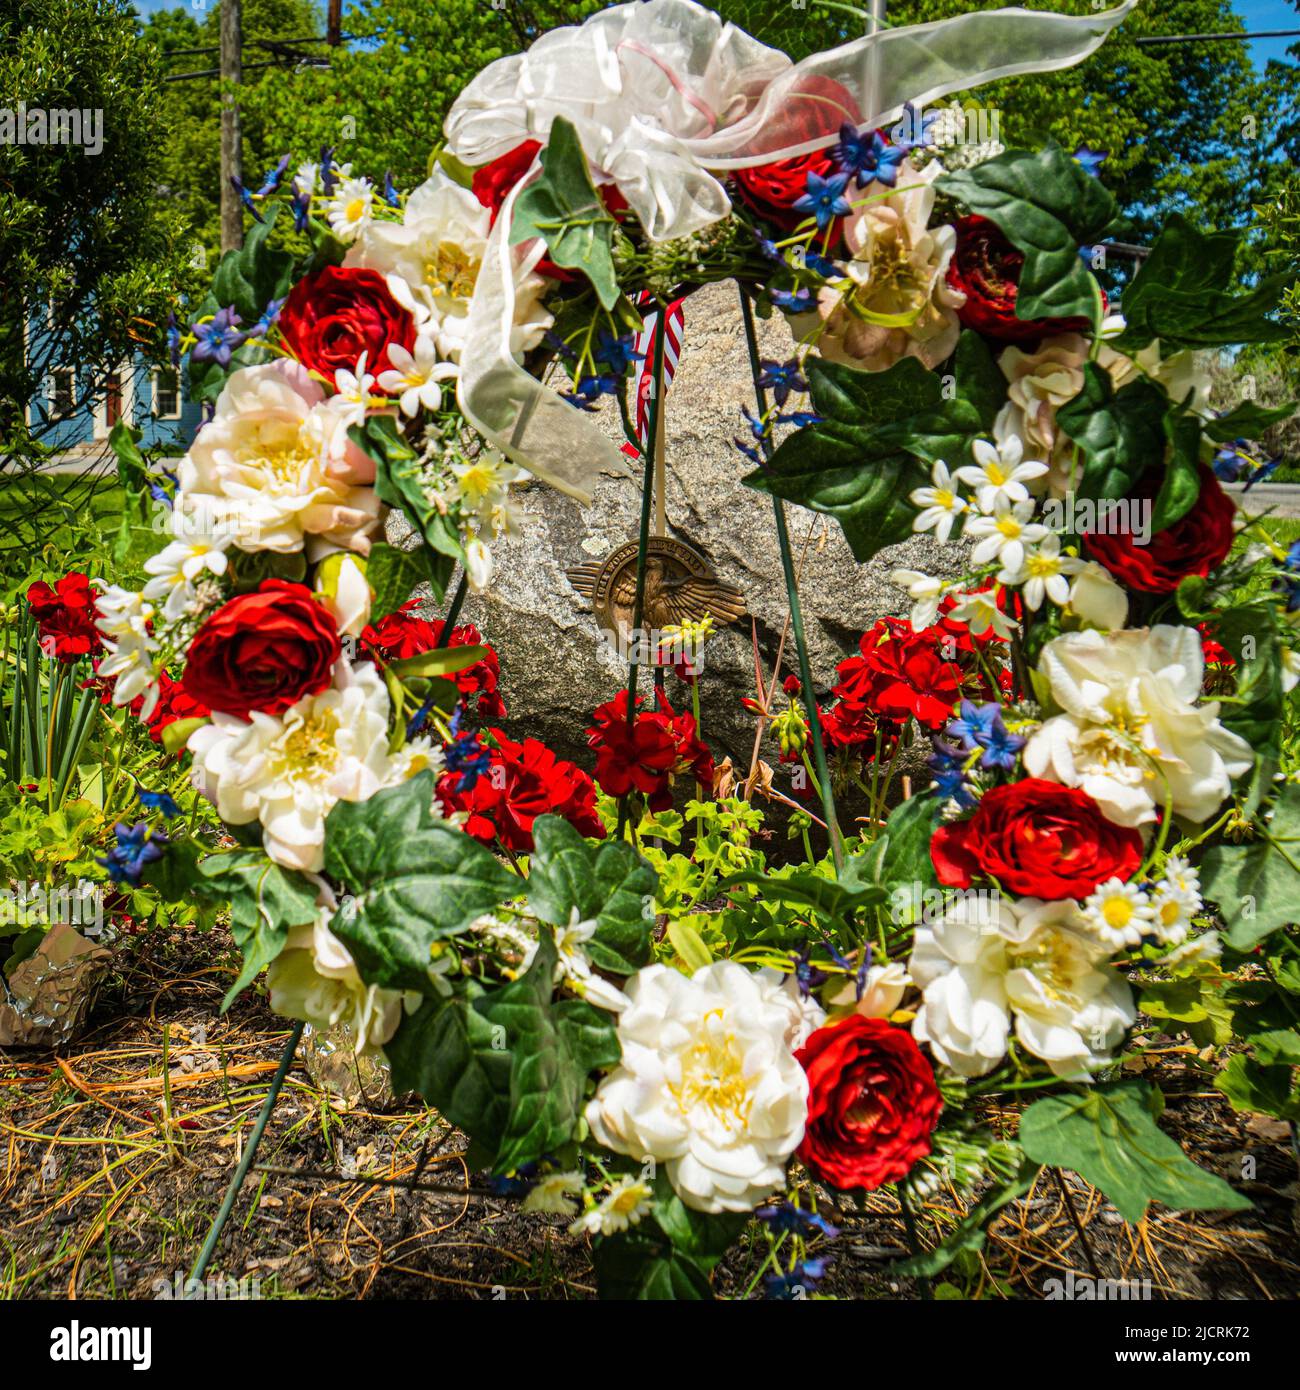 Memorial Day wreath of red, white and blue flowers to commemorate war veterans on a New England village green Stock Photo